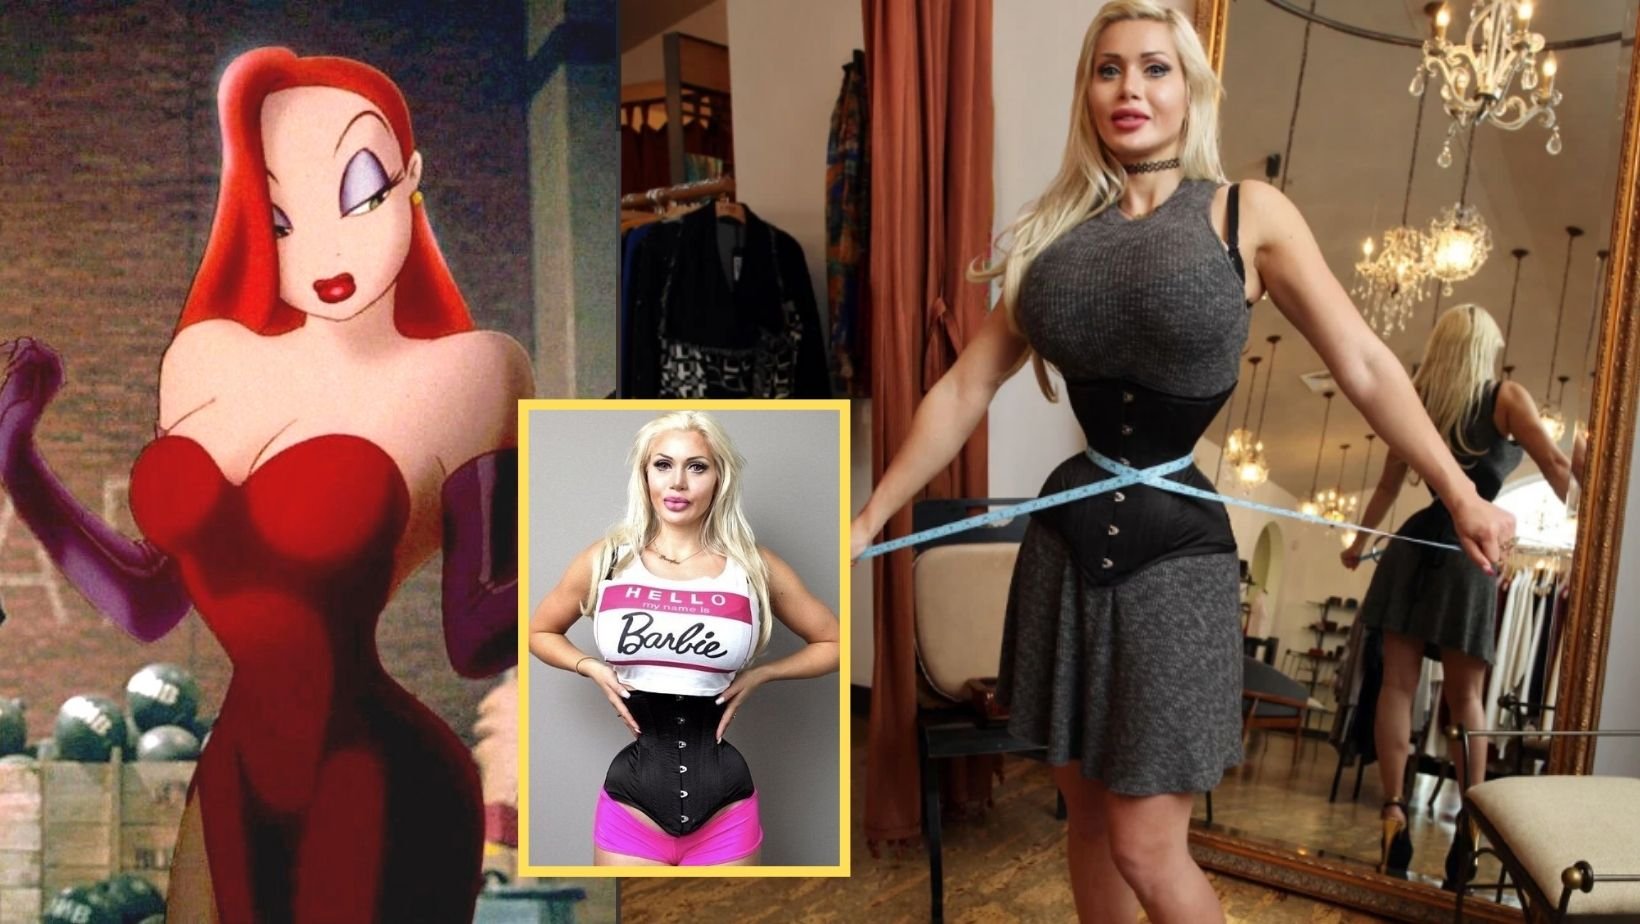 1 16.jpg?resize=412,232 - Woman Had Her Ribs Removed To Achieve Jessica Rabbit’s 14-Inch Waist